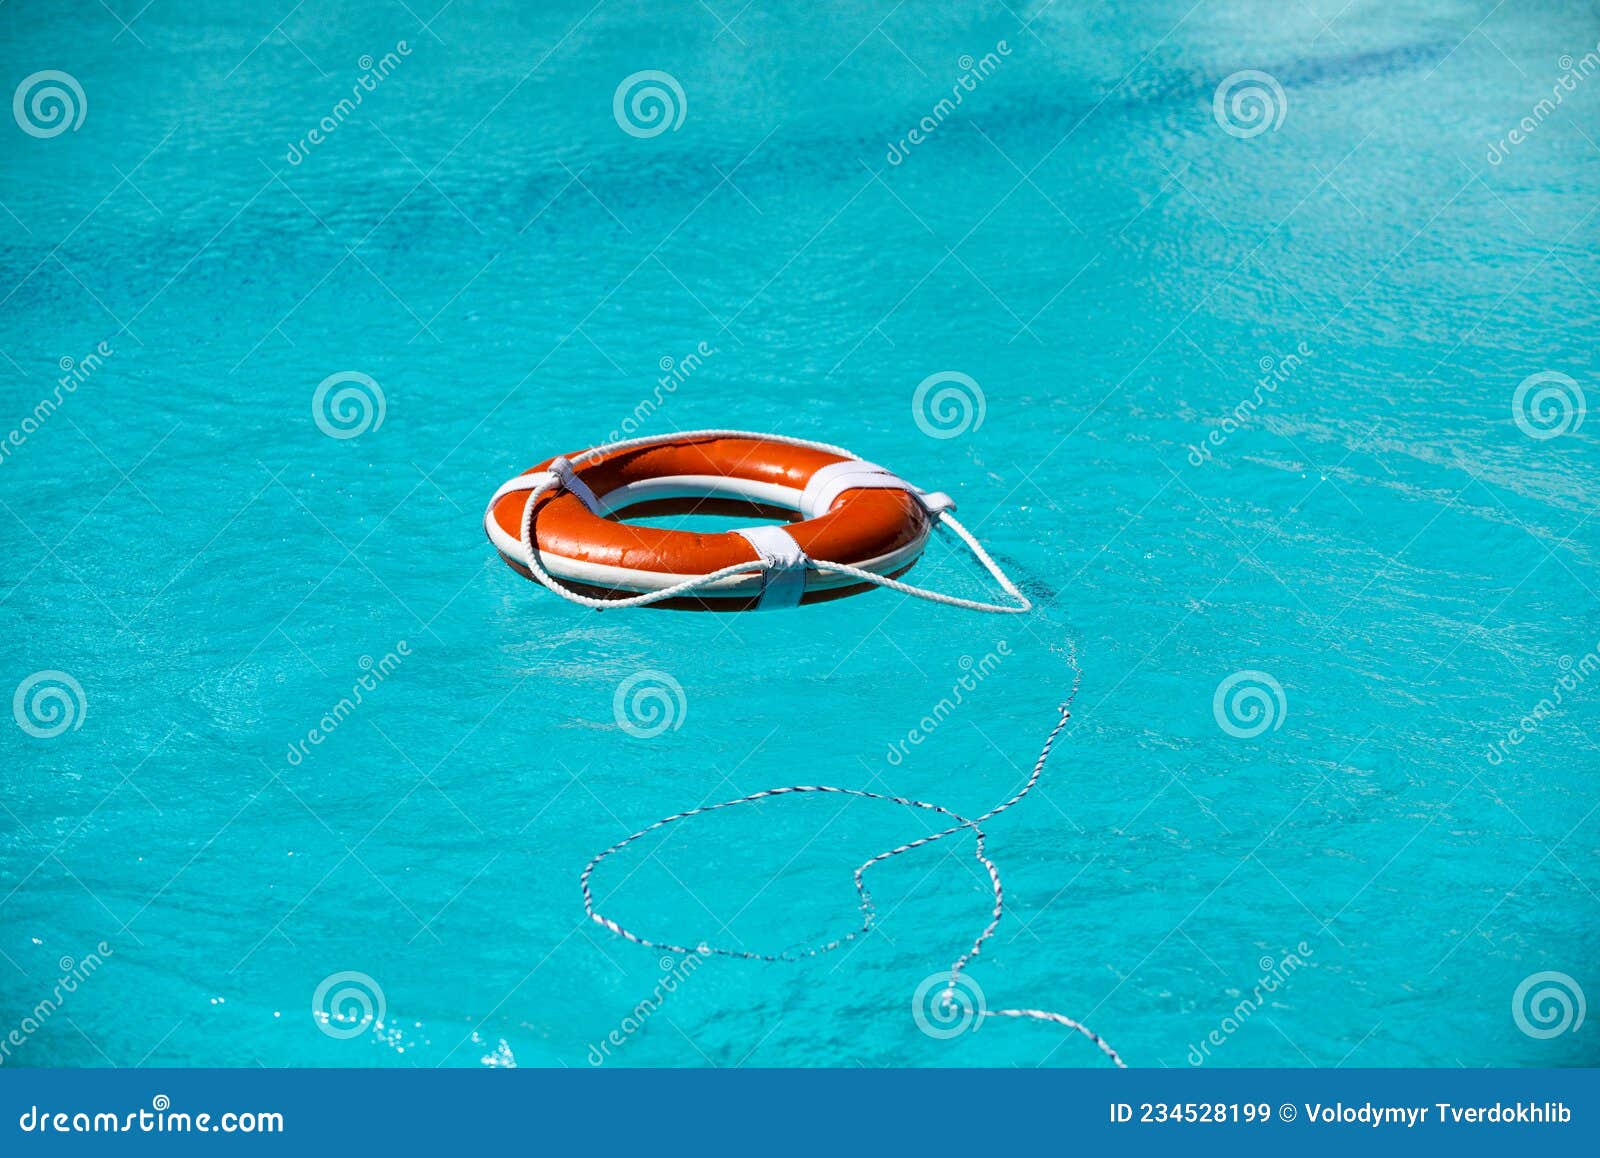 Lifebuoy on the Water Background. the Concept of Help, Rescue, Drowning ...